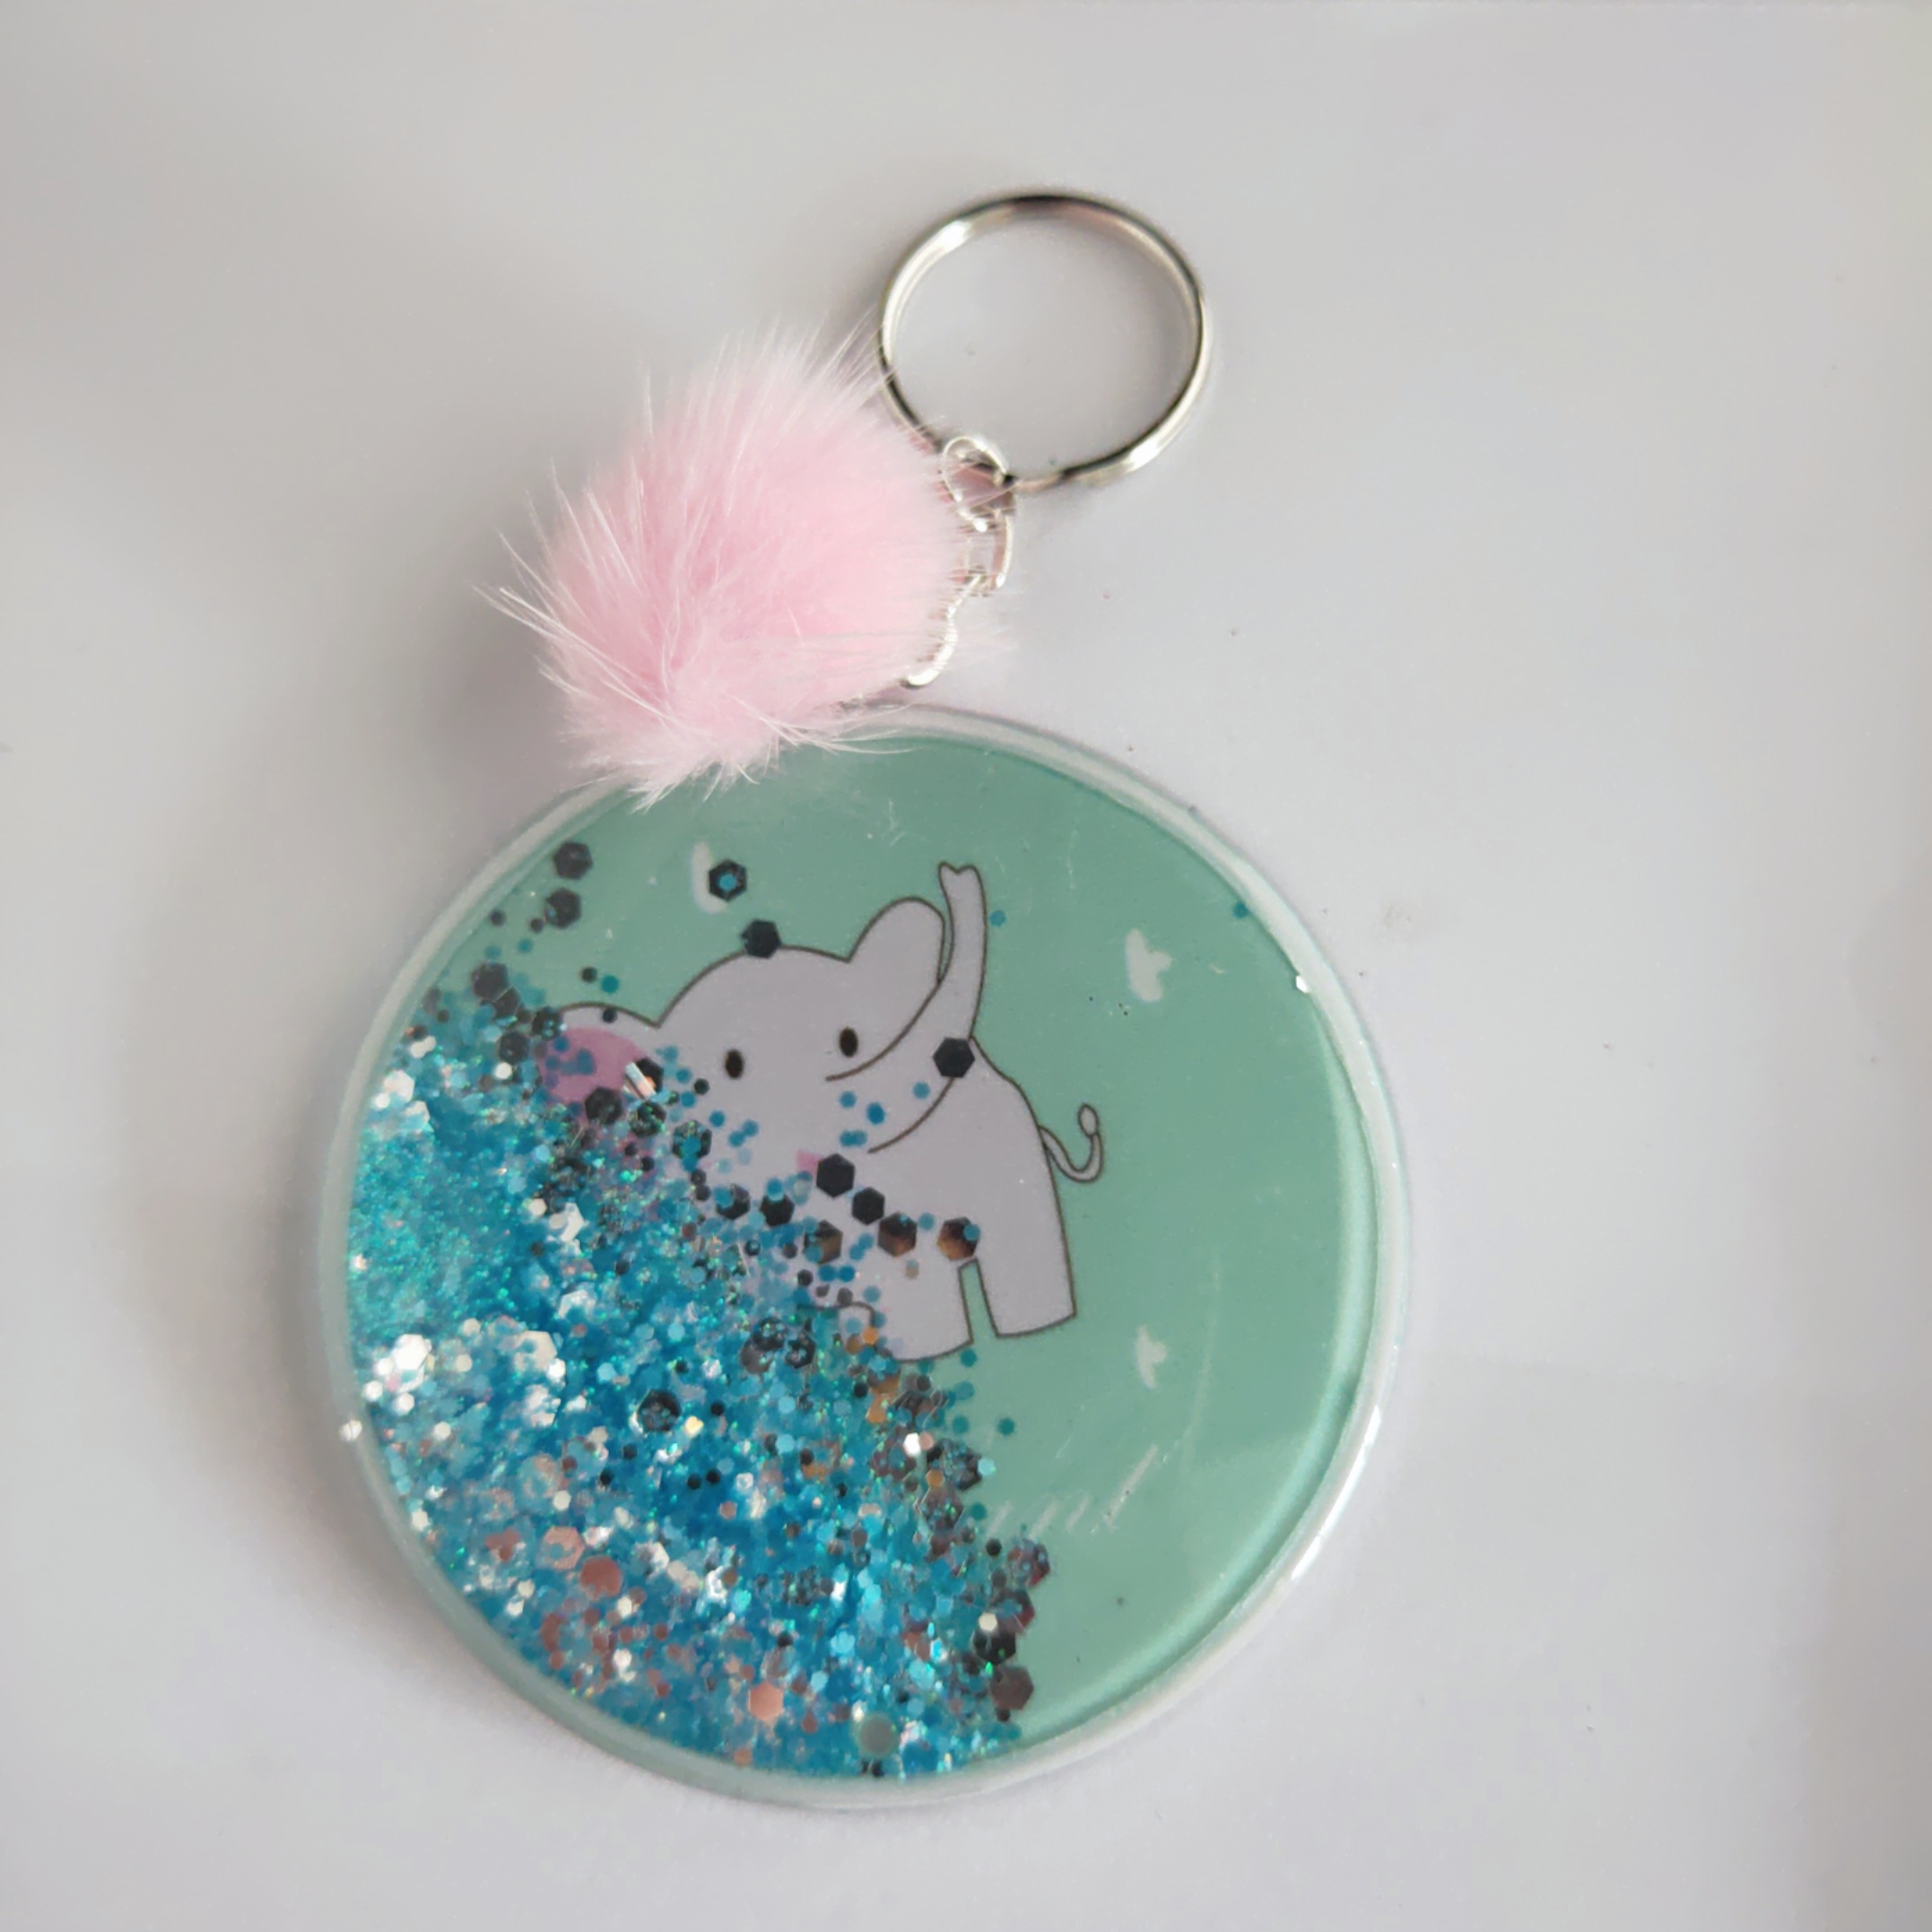 Fluiding glitter one side mirror in round shaped with keychain charms how to decorate